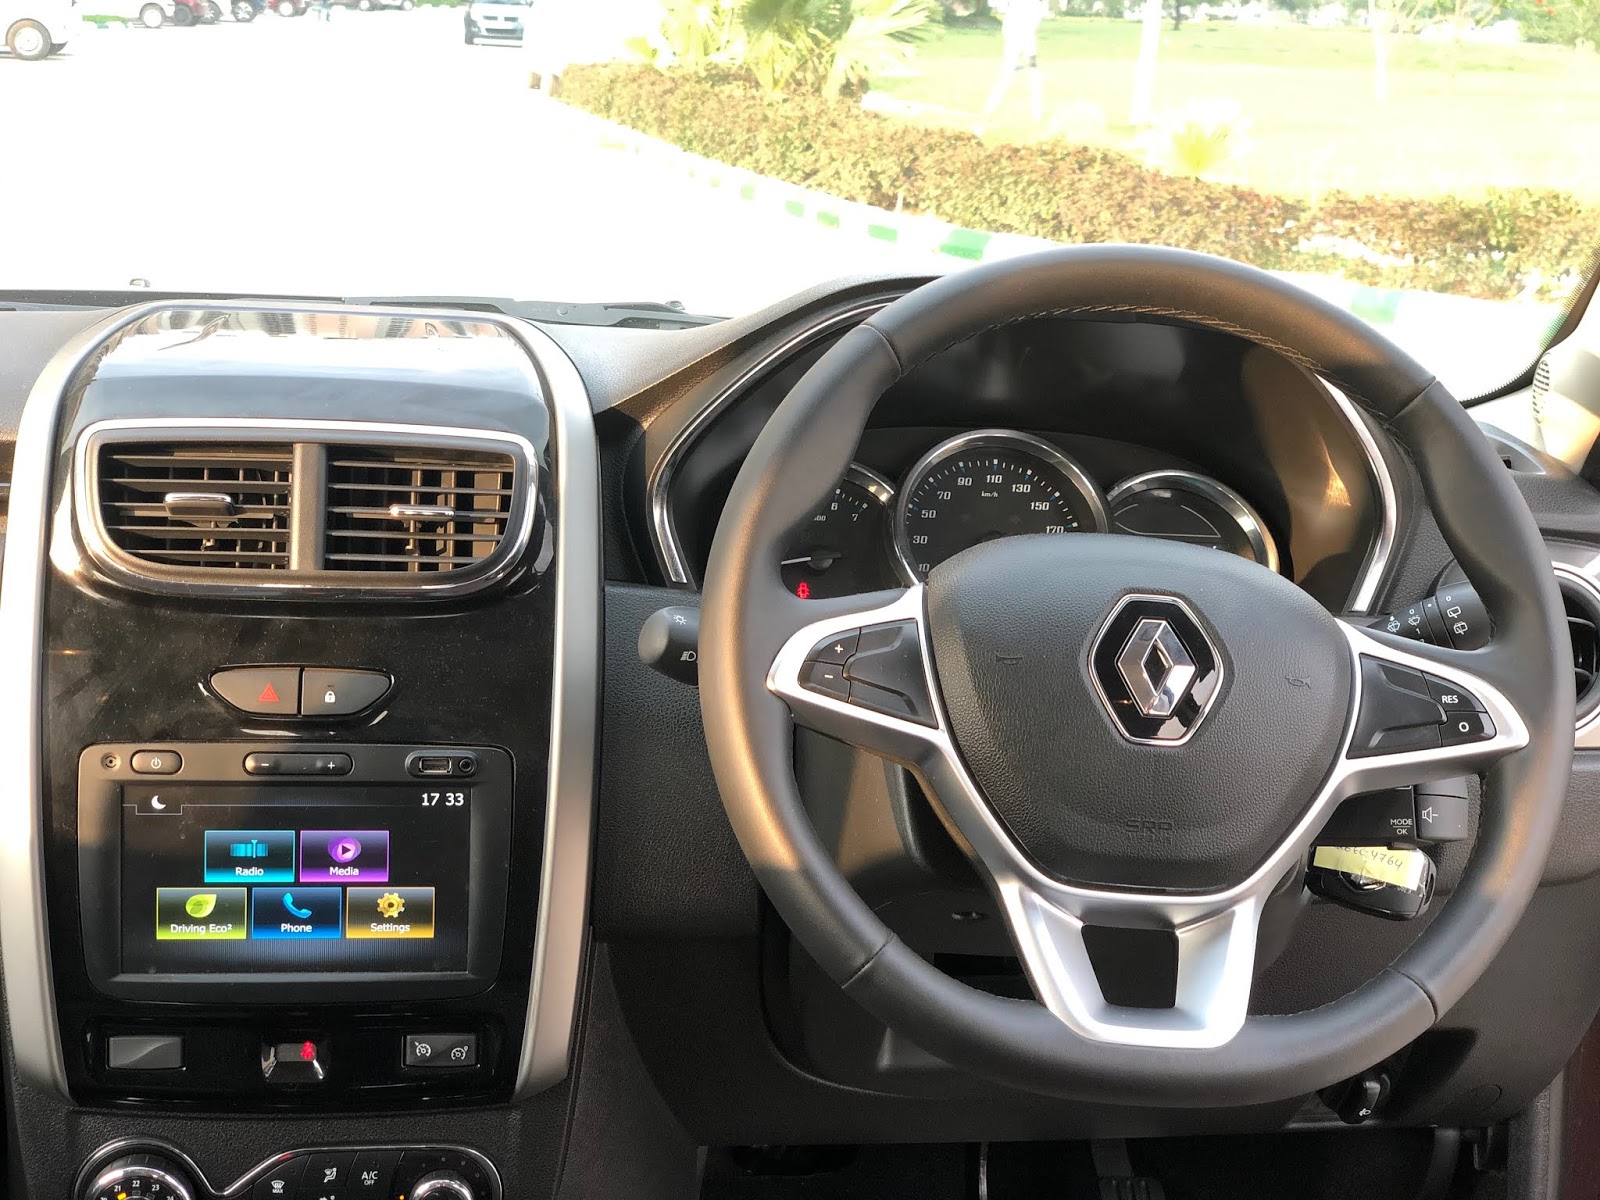 Interiors of the Renault Duster RXZ 110PS AMT dCi Easy-R variant